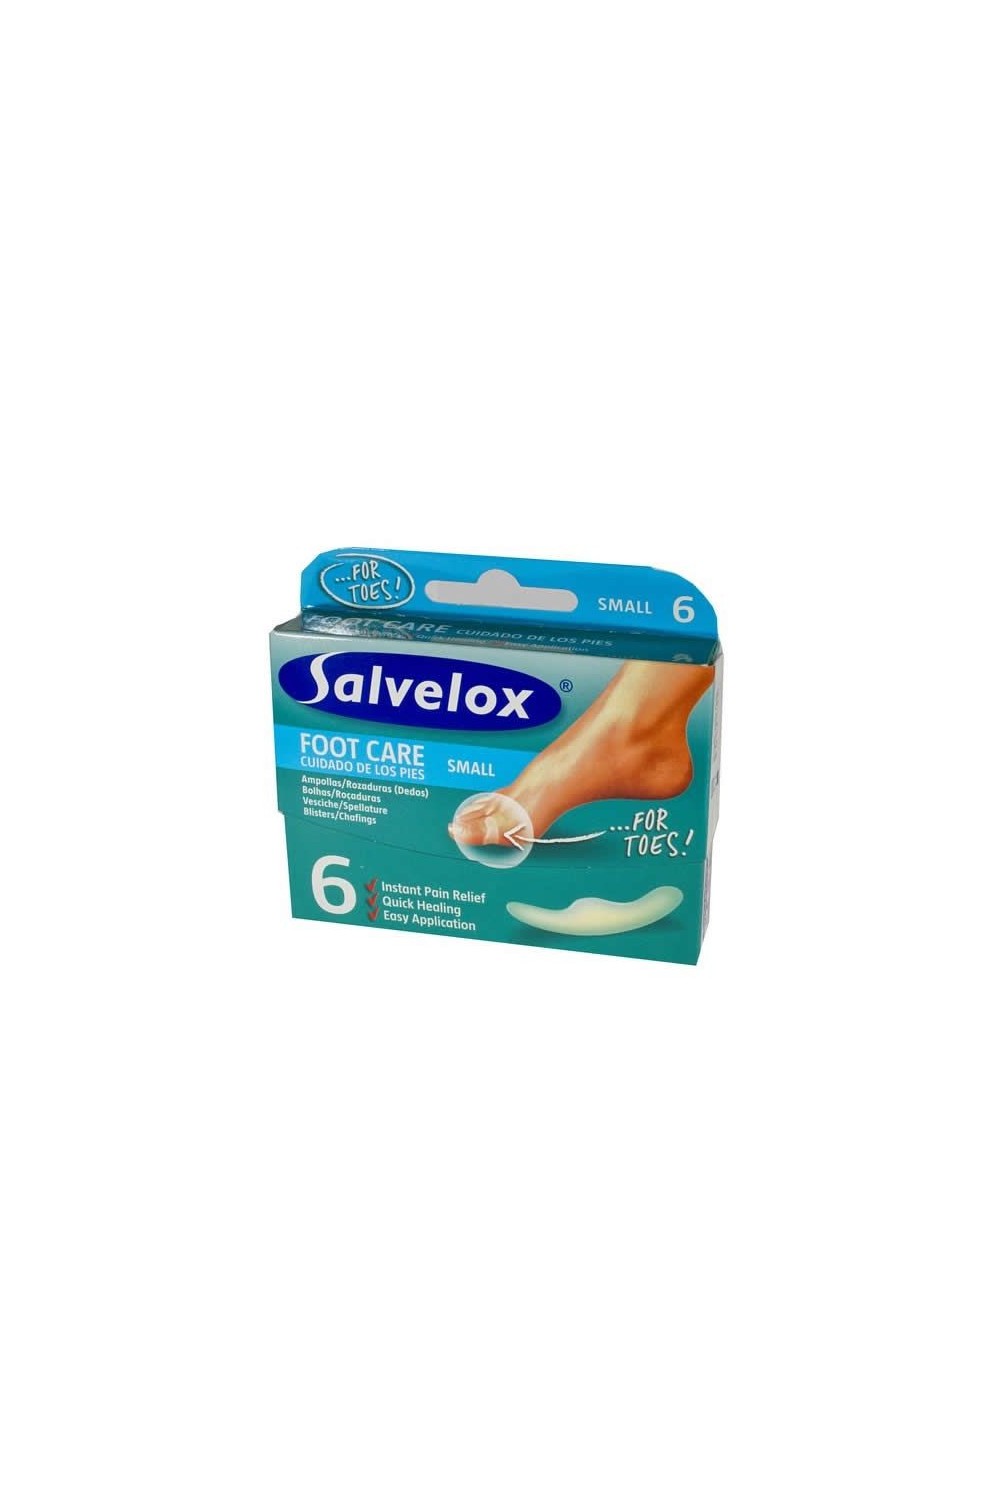 Salvelox Foot Care Small Blisters 6 Units 21×64 mm.